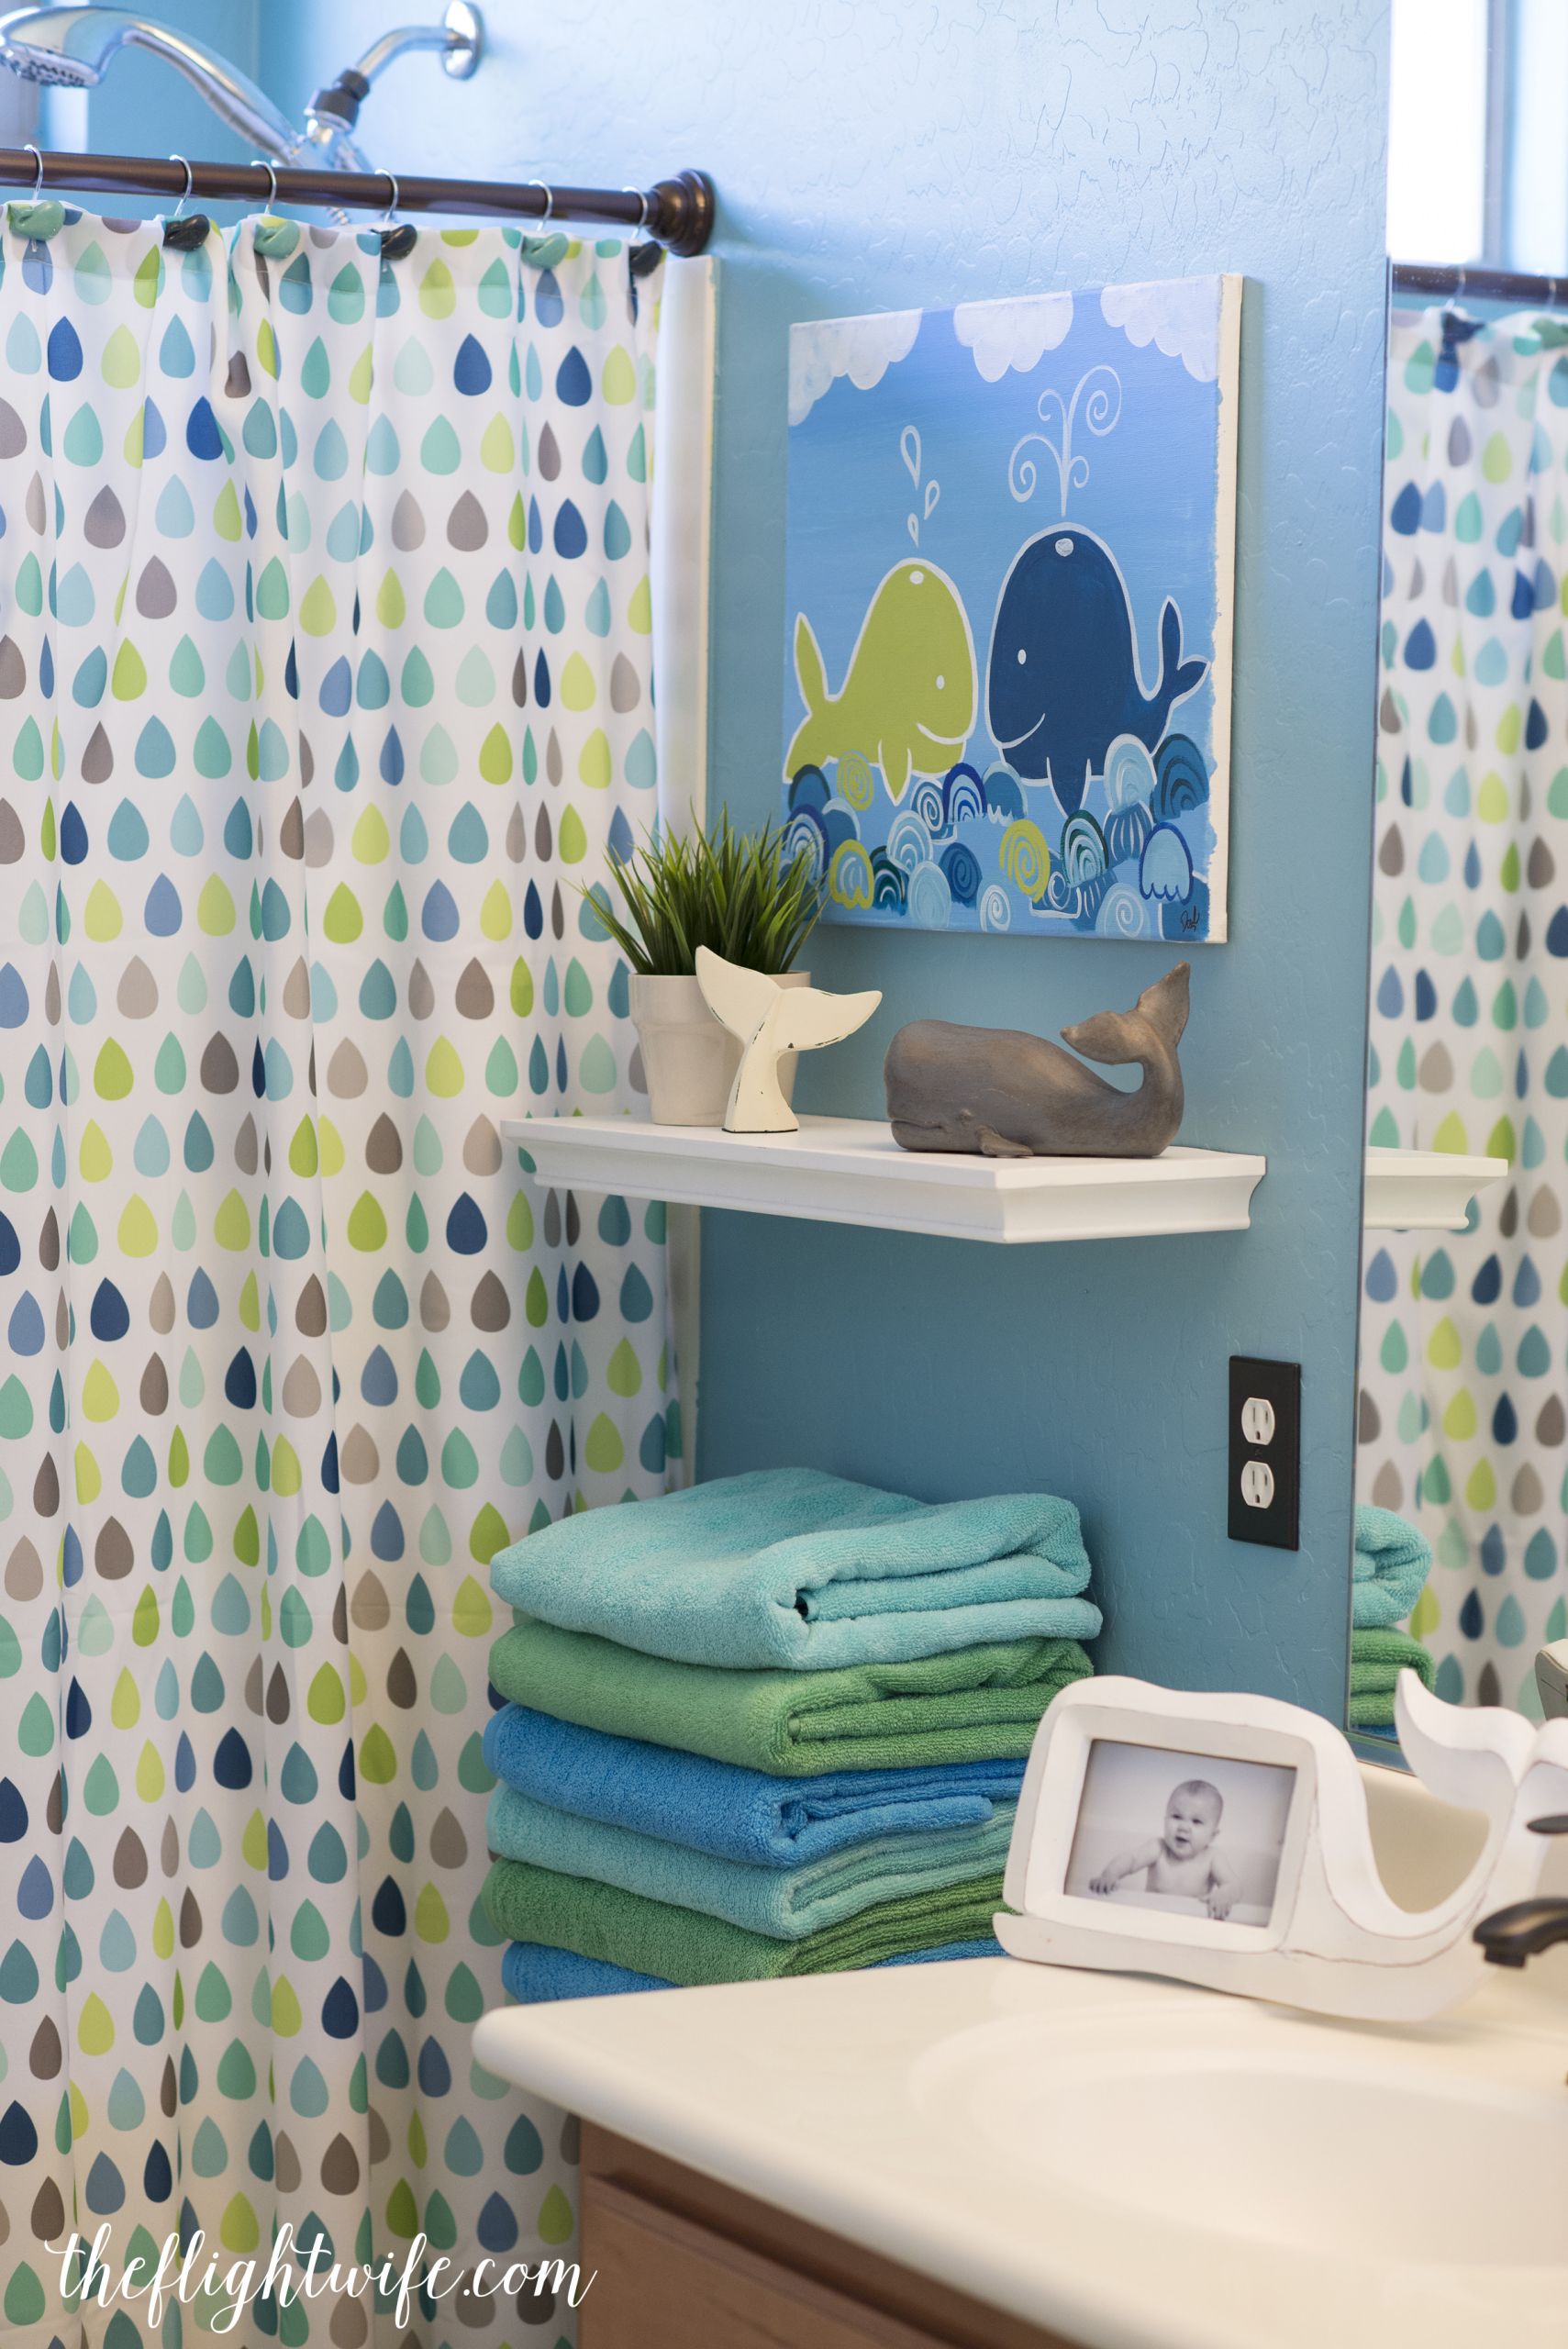 Bathroom Sets For Kids
 Kids Bathroom Makeover Fun And Friendly Whales The